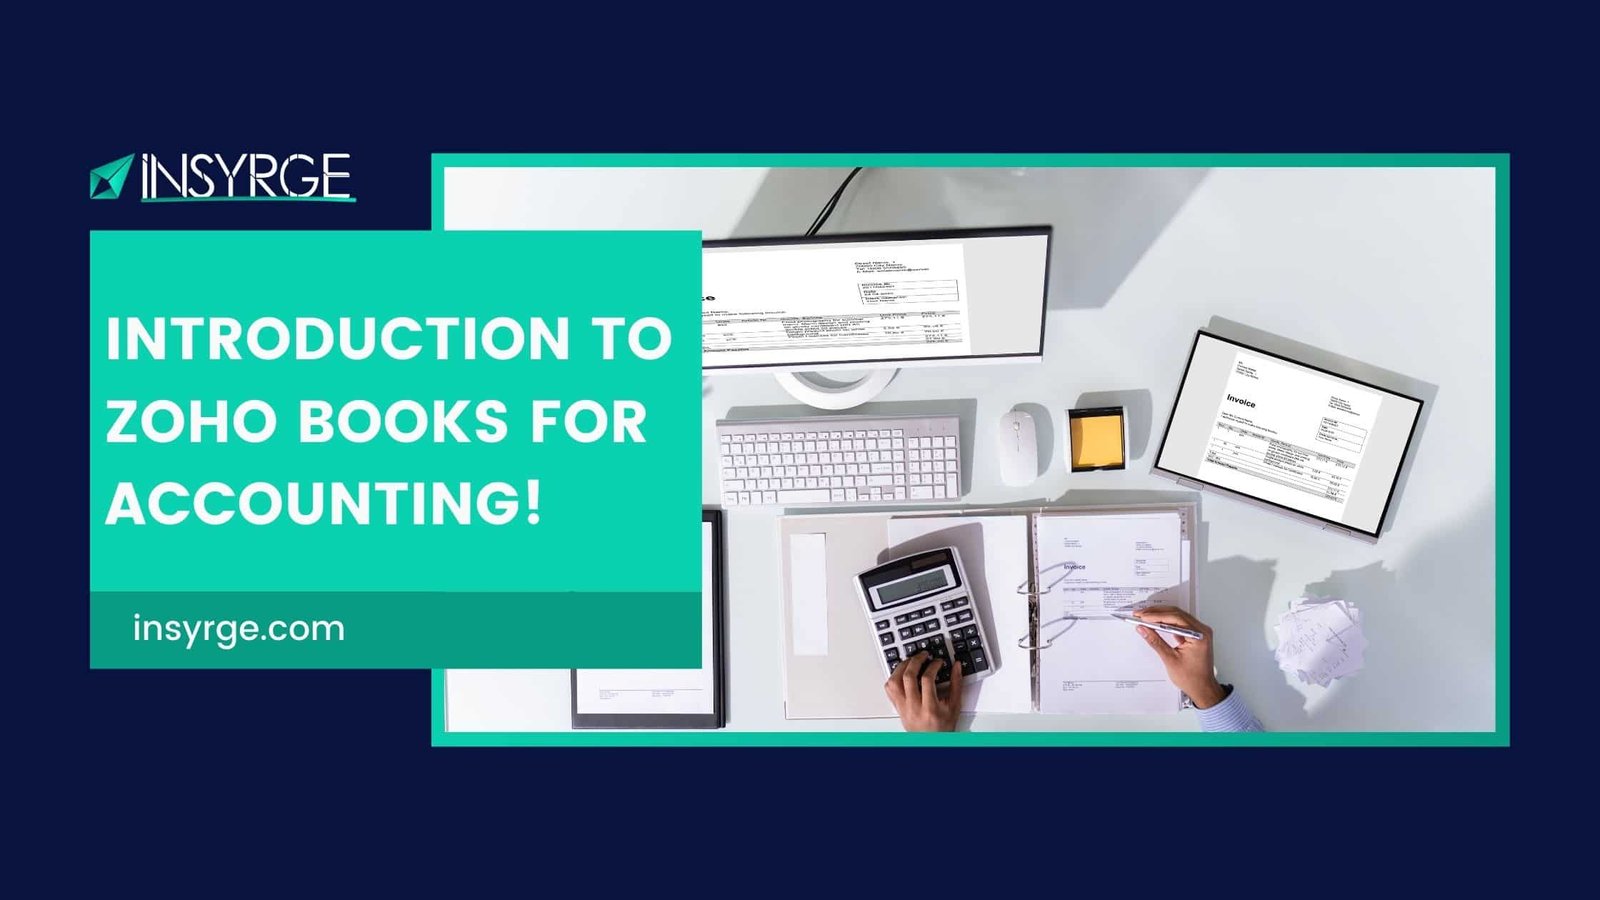 Introduction to Zoho Books For Accounting! - Insyrge, Zoho Professional Services